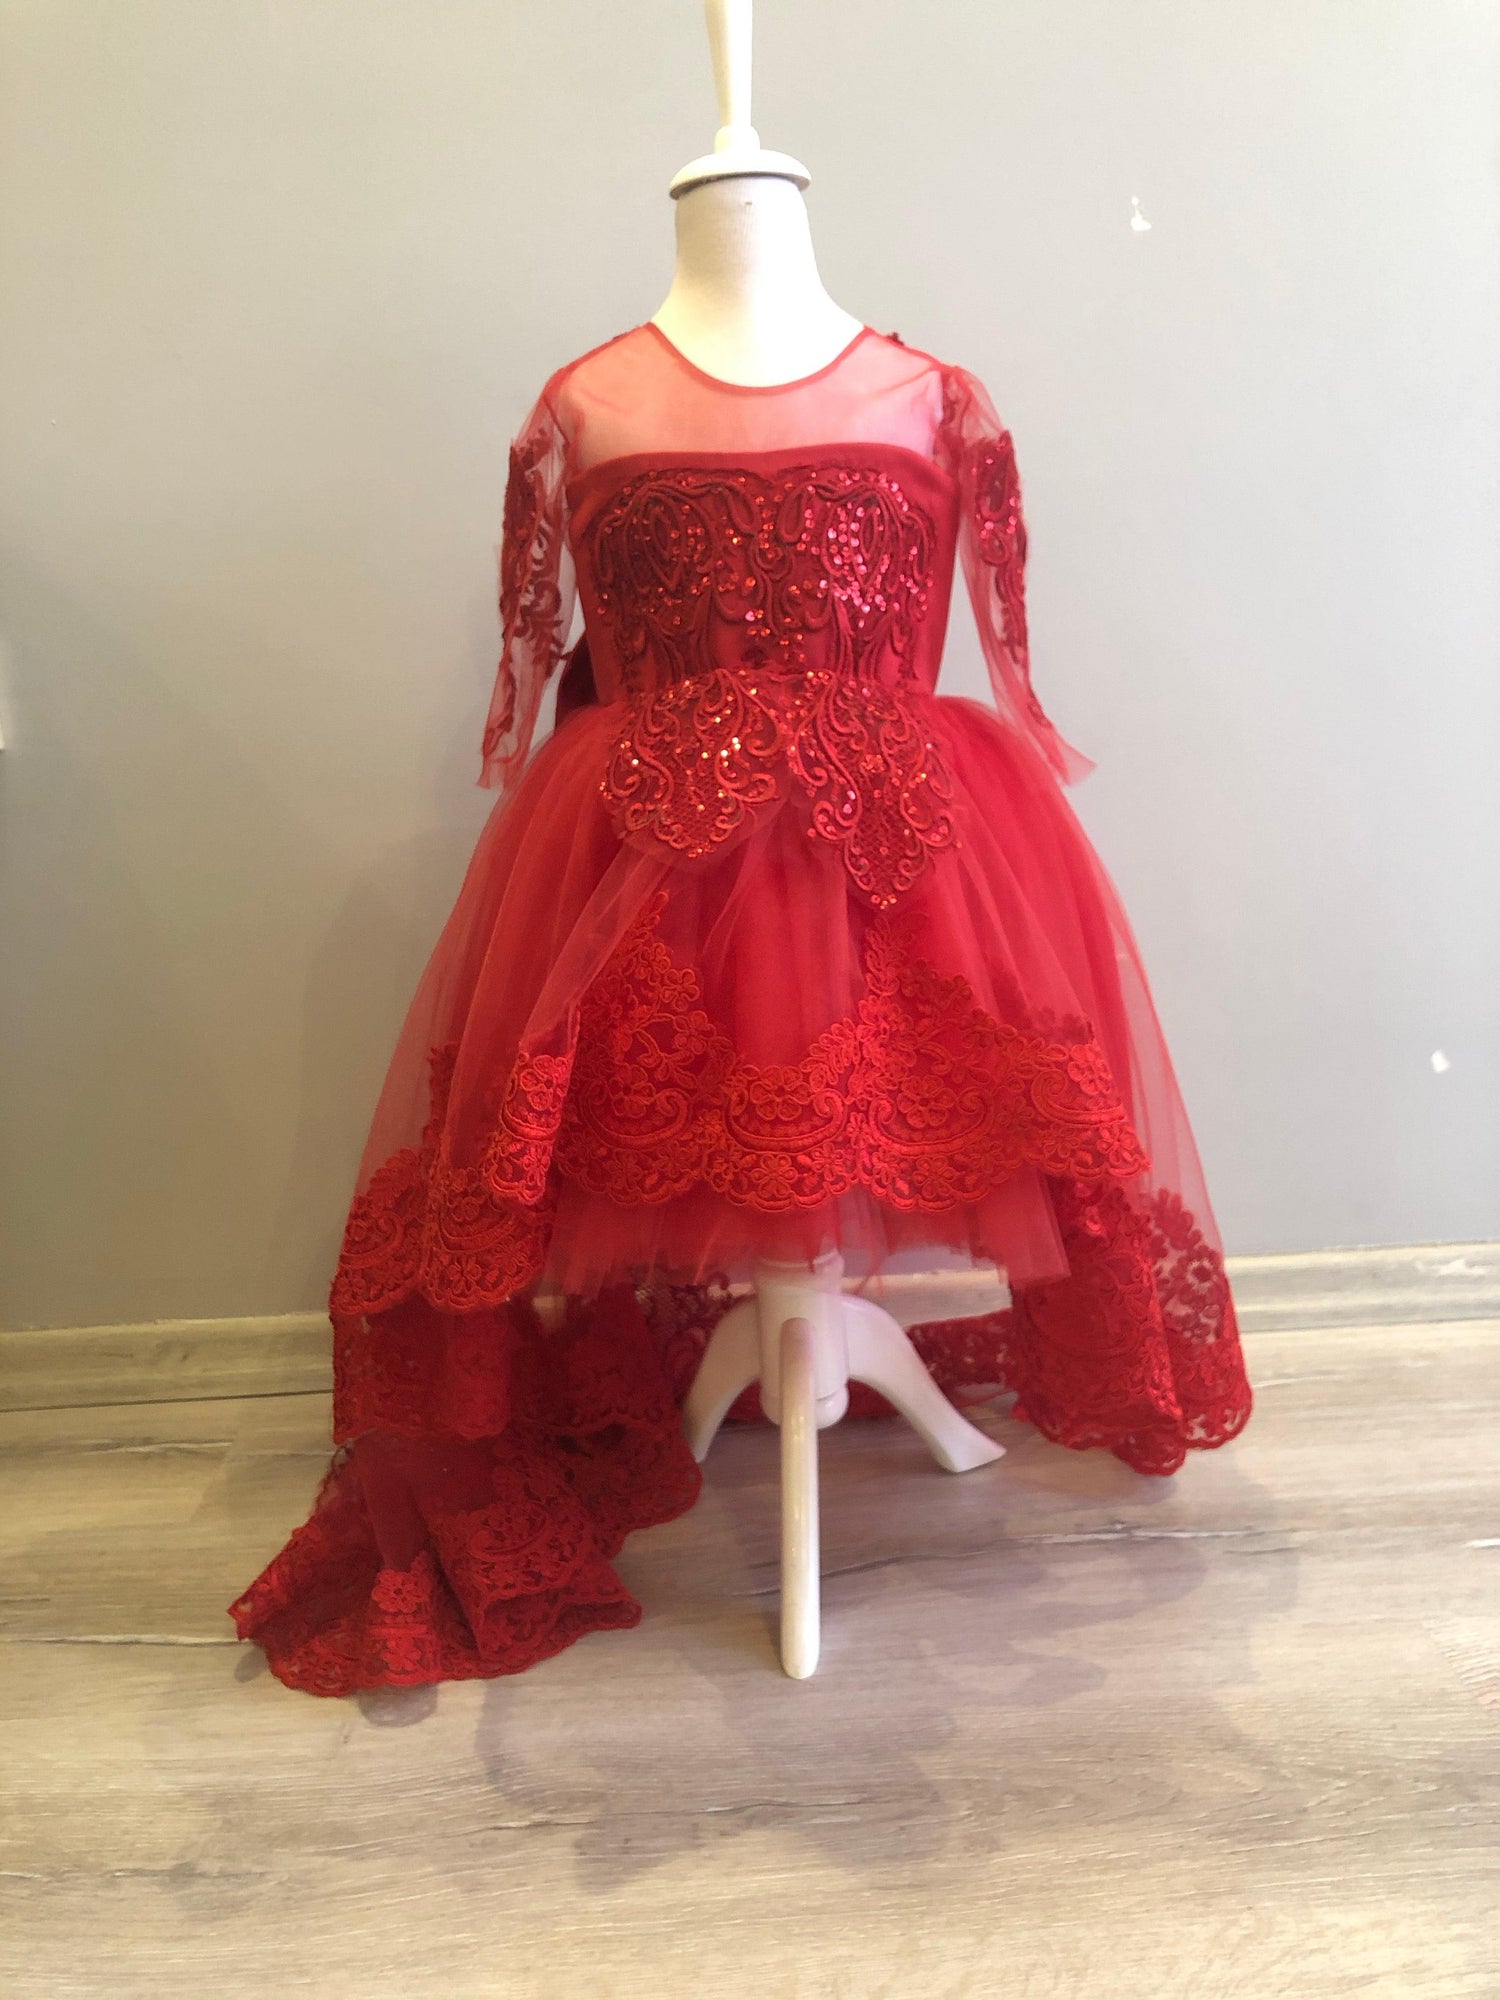 Red flower dress with lace tail - MyBabyByMerry 